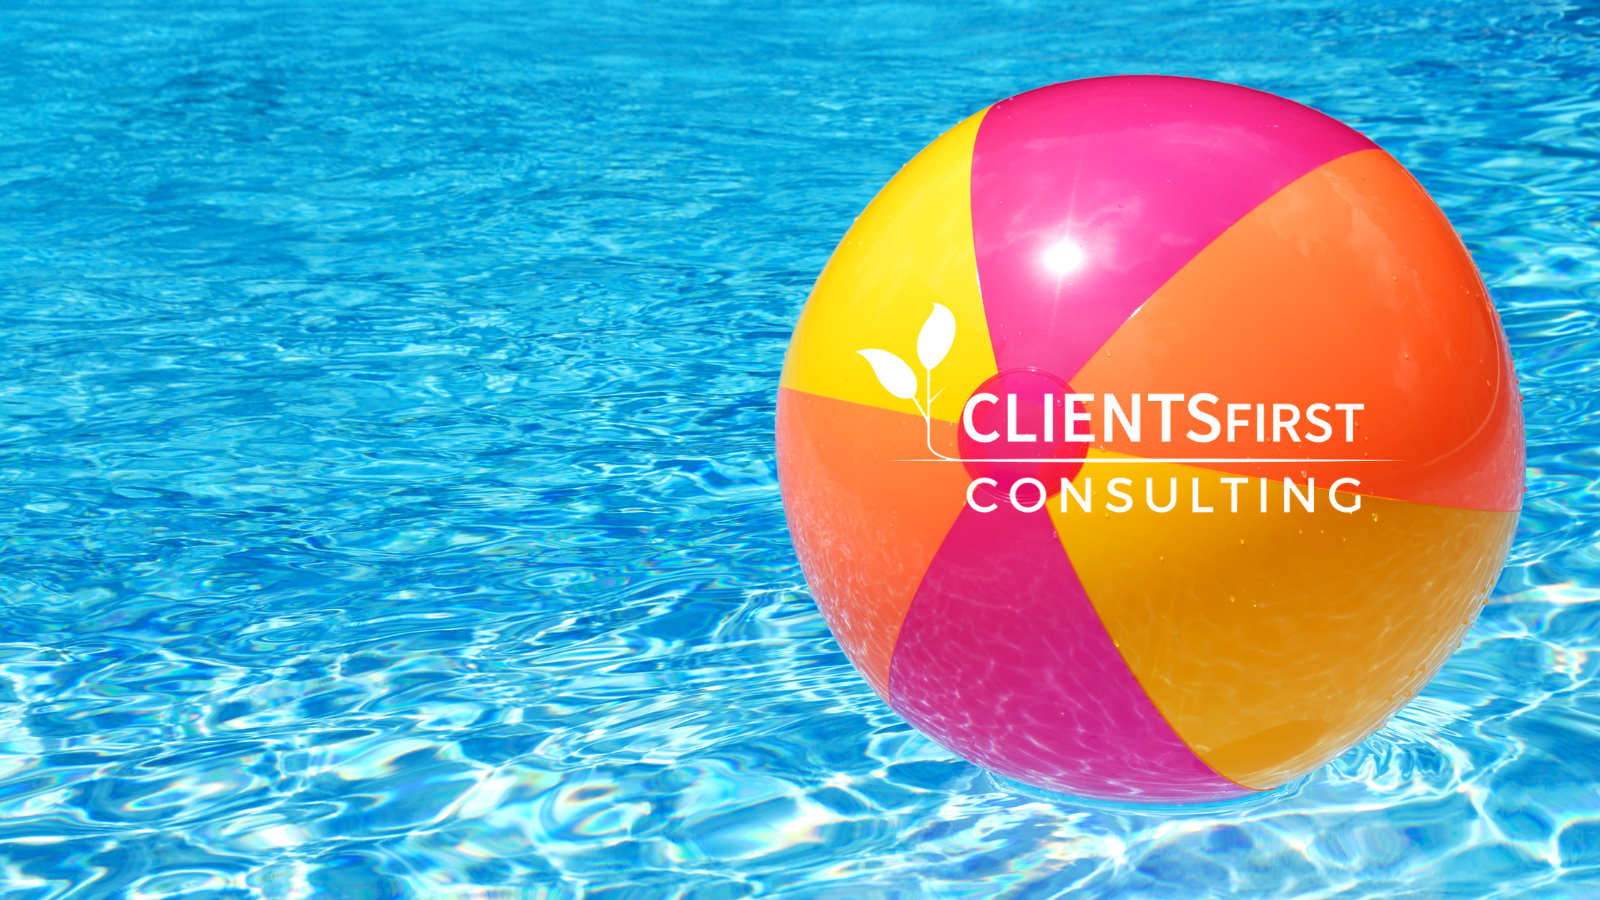 Refreshing Your Law Firm's CRM Data This Summer: A Creative Approach